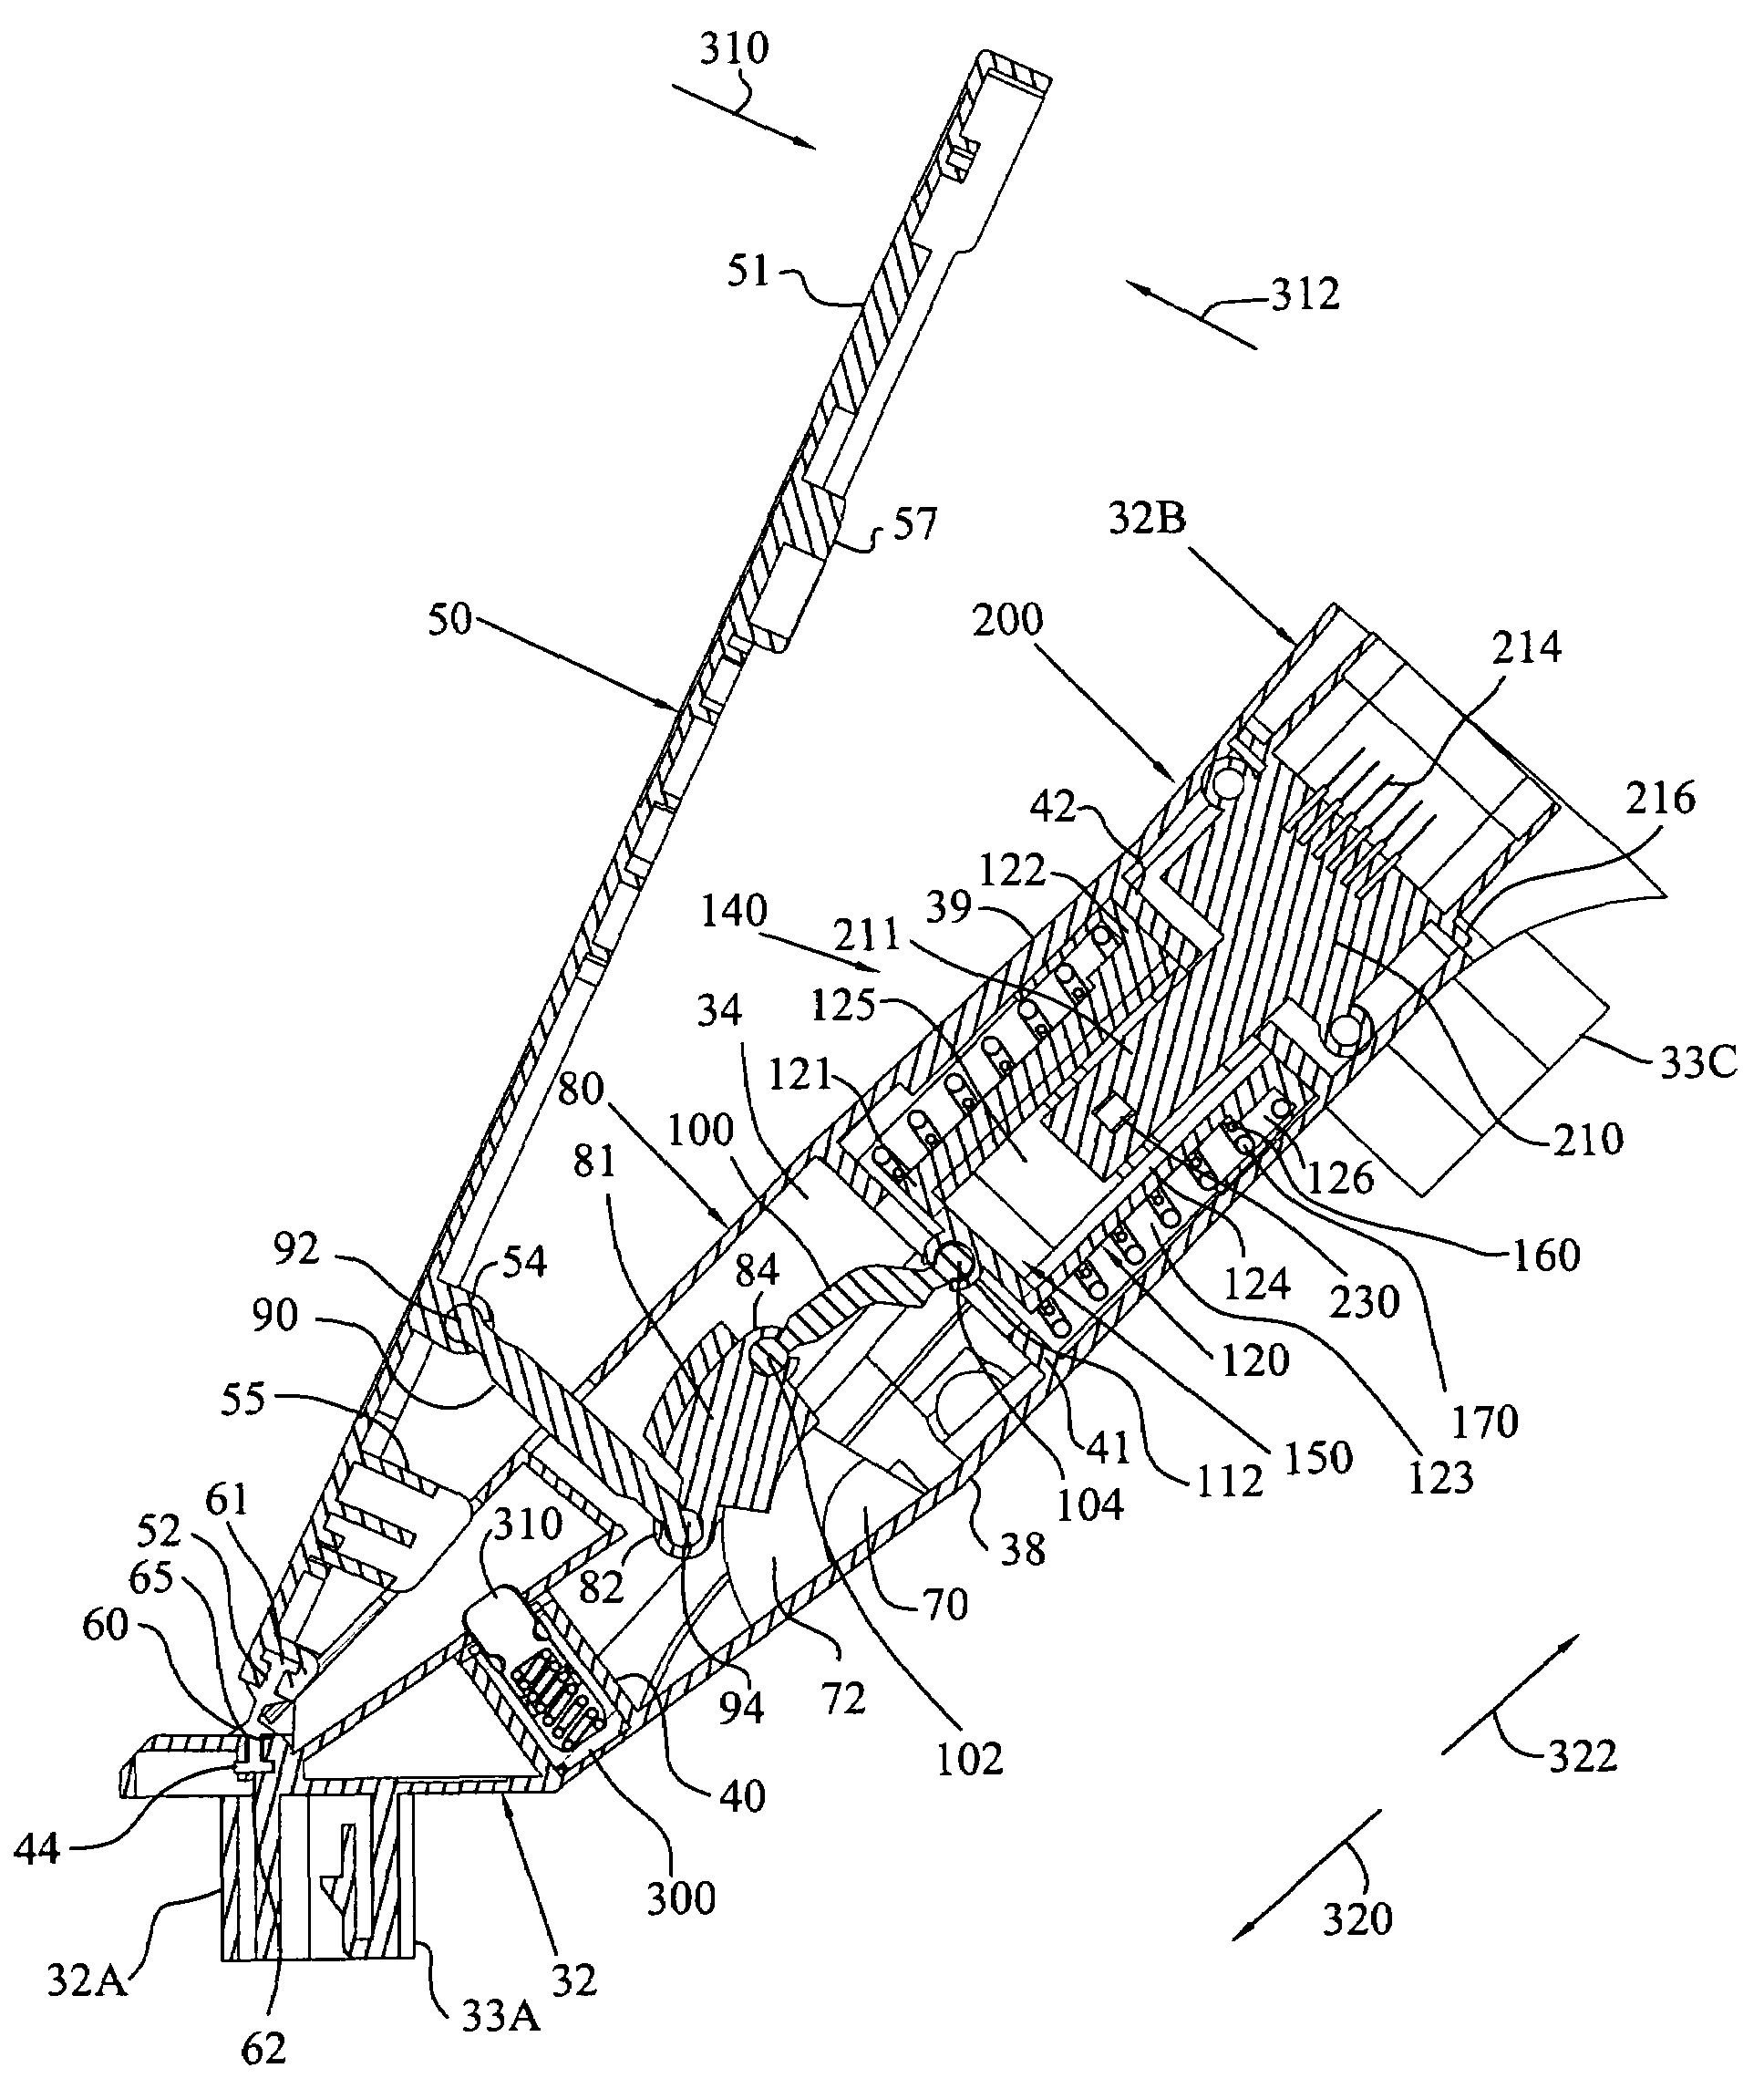 Accelerator pedal for a vehicle